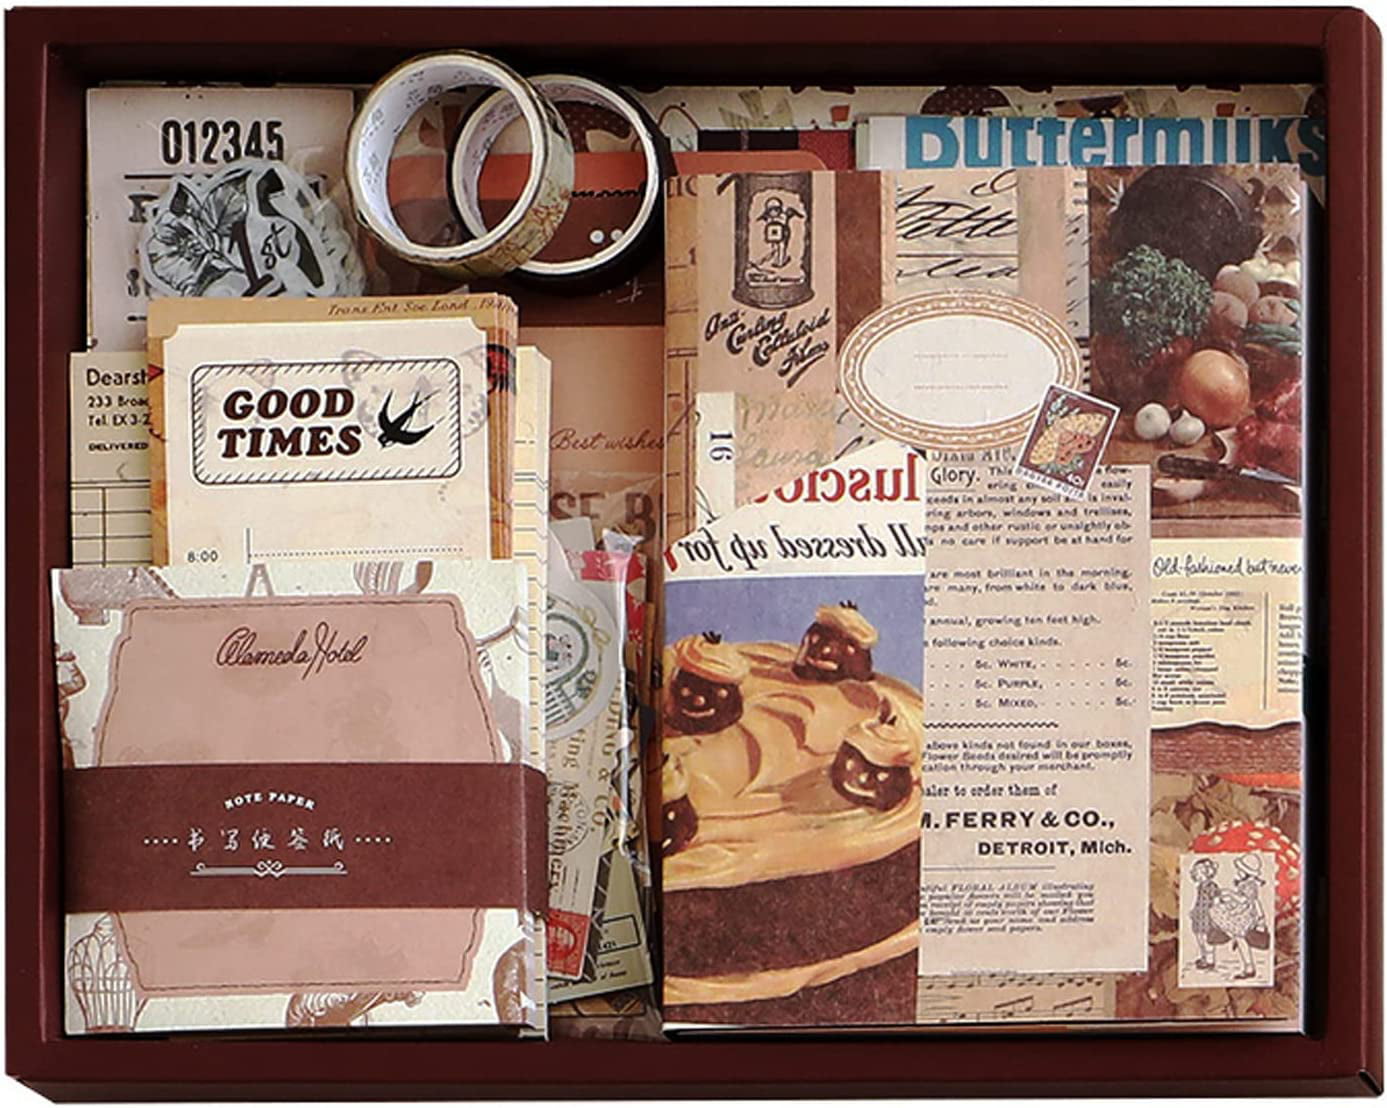 Vintage Aesthetic Scrapbook Kit, Bullet Junk Journal Kit with Journaling/Scrapbooking Supplies, Stationery, A6 Grid Notebook, DIY Gift for Teen Girl